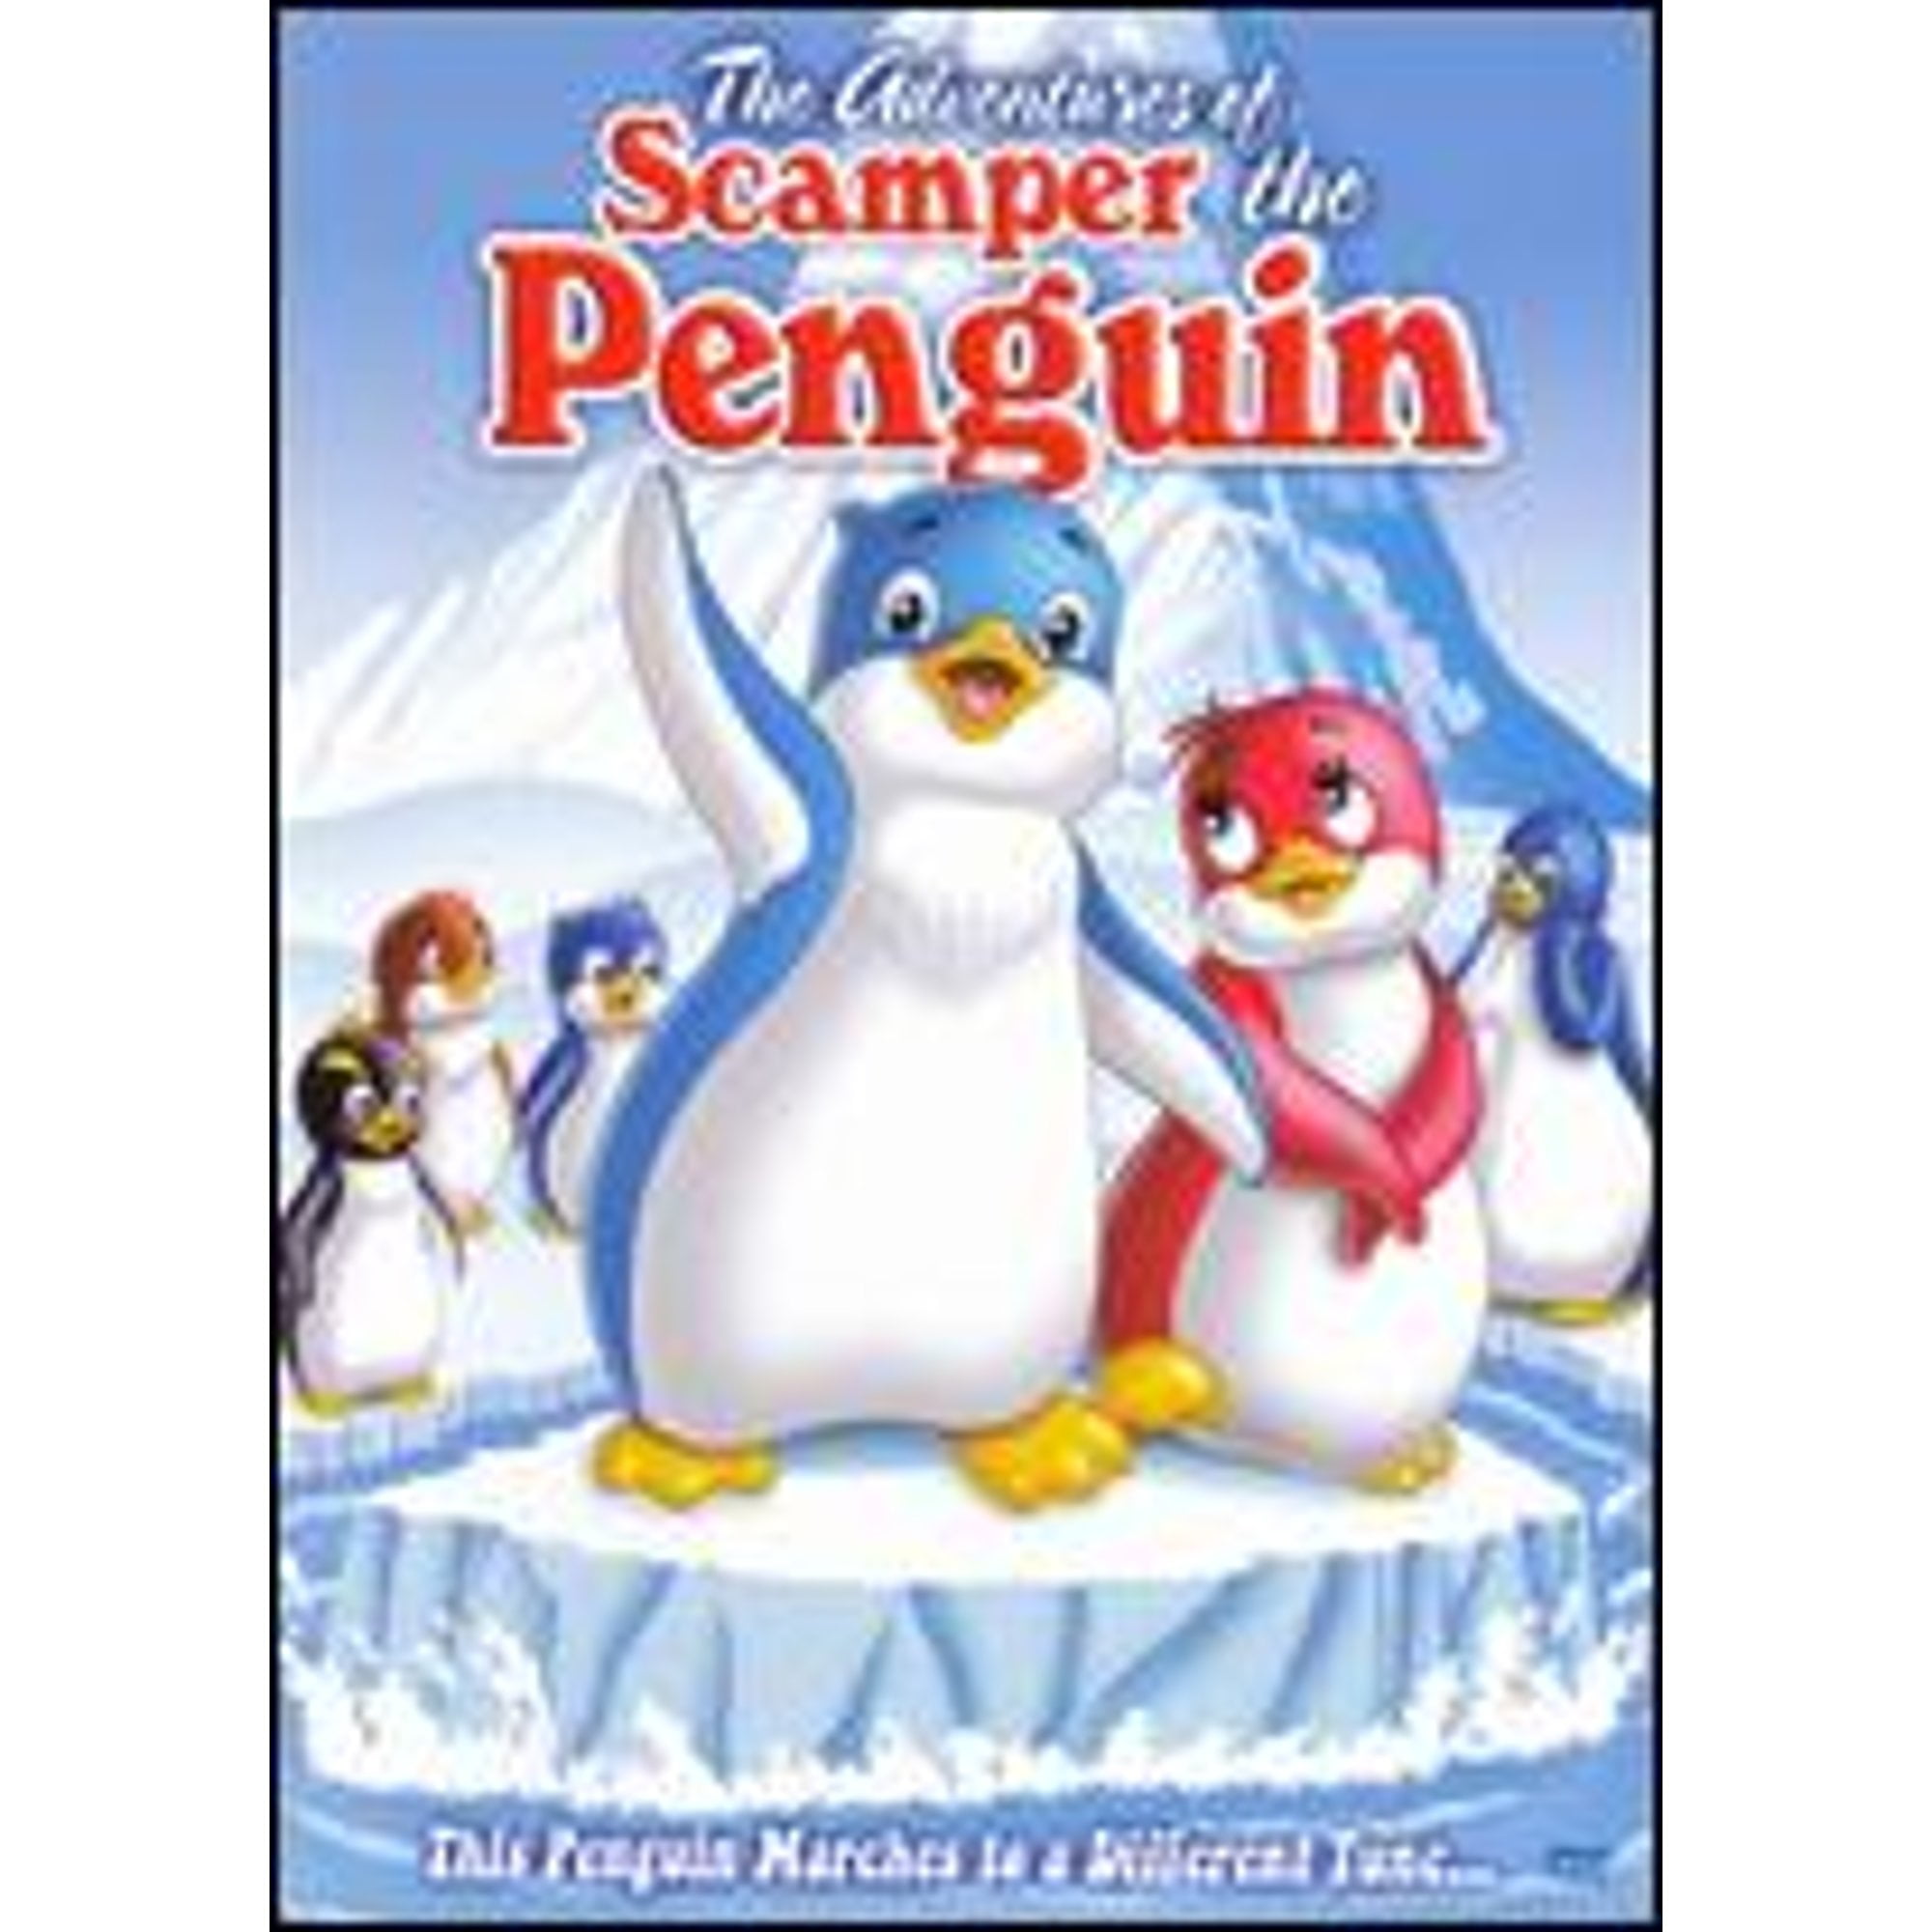 The Adventures of Scamper the Penguin (Pre-Owned DVD 0084296408412)  directed by Jim Terry 